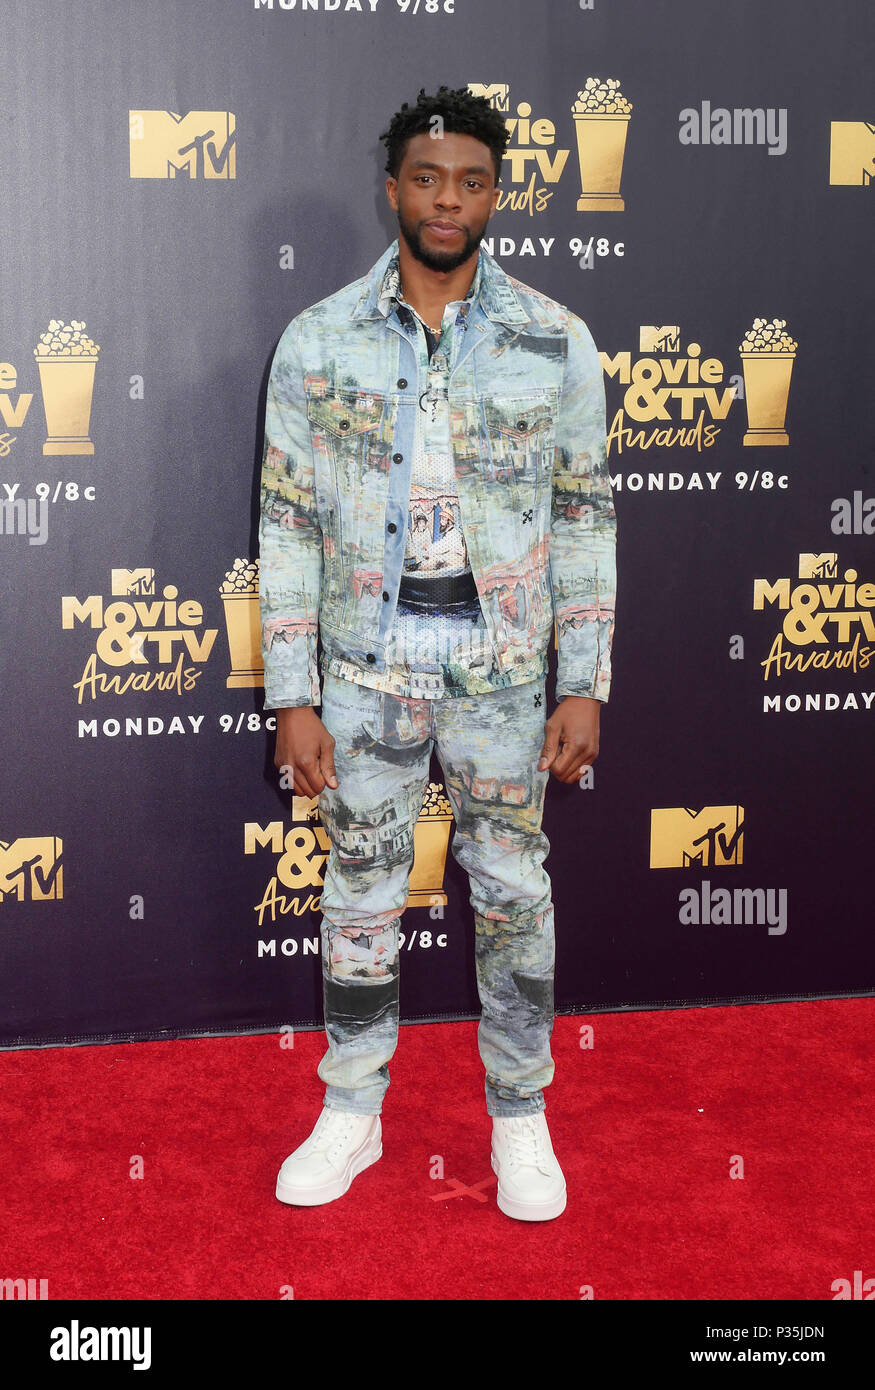 Chadwick Boseman attending the 2018 MTV Movie and TV Awards held at the Barker Hangar in Los Angeles, USA. Stock Photo